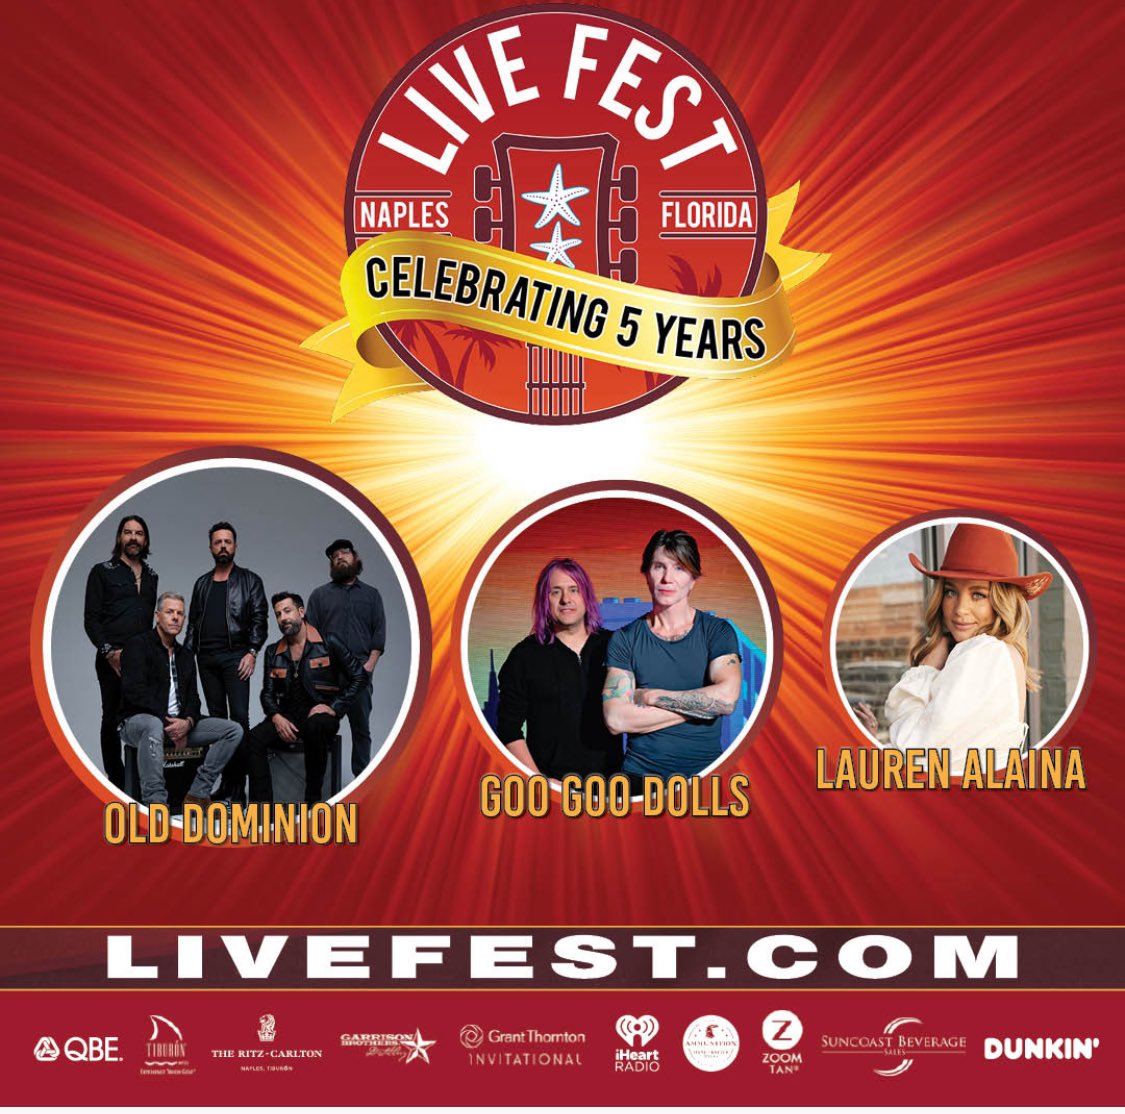 🚨Breaking News 🚨 🎶🎵🎹🎸
Live Fest superstar line up is 🔥 Old Dominion, Goo Goo Dolls, Lauren Alaina. 🔥 Tickets for public on sale this Thursday starting at 10:00am. Naples get ya popcorn ready. They fixing to crush it. #music #festival #crushingit #bekind